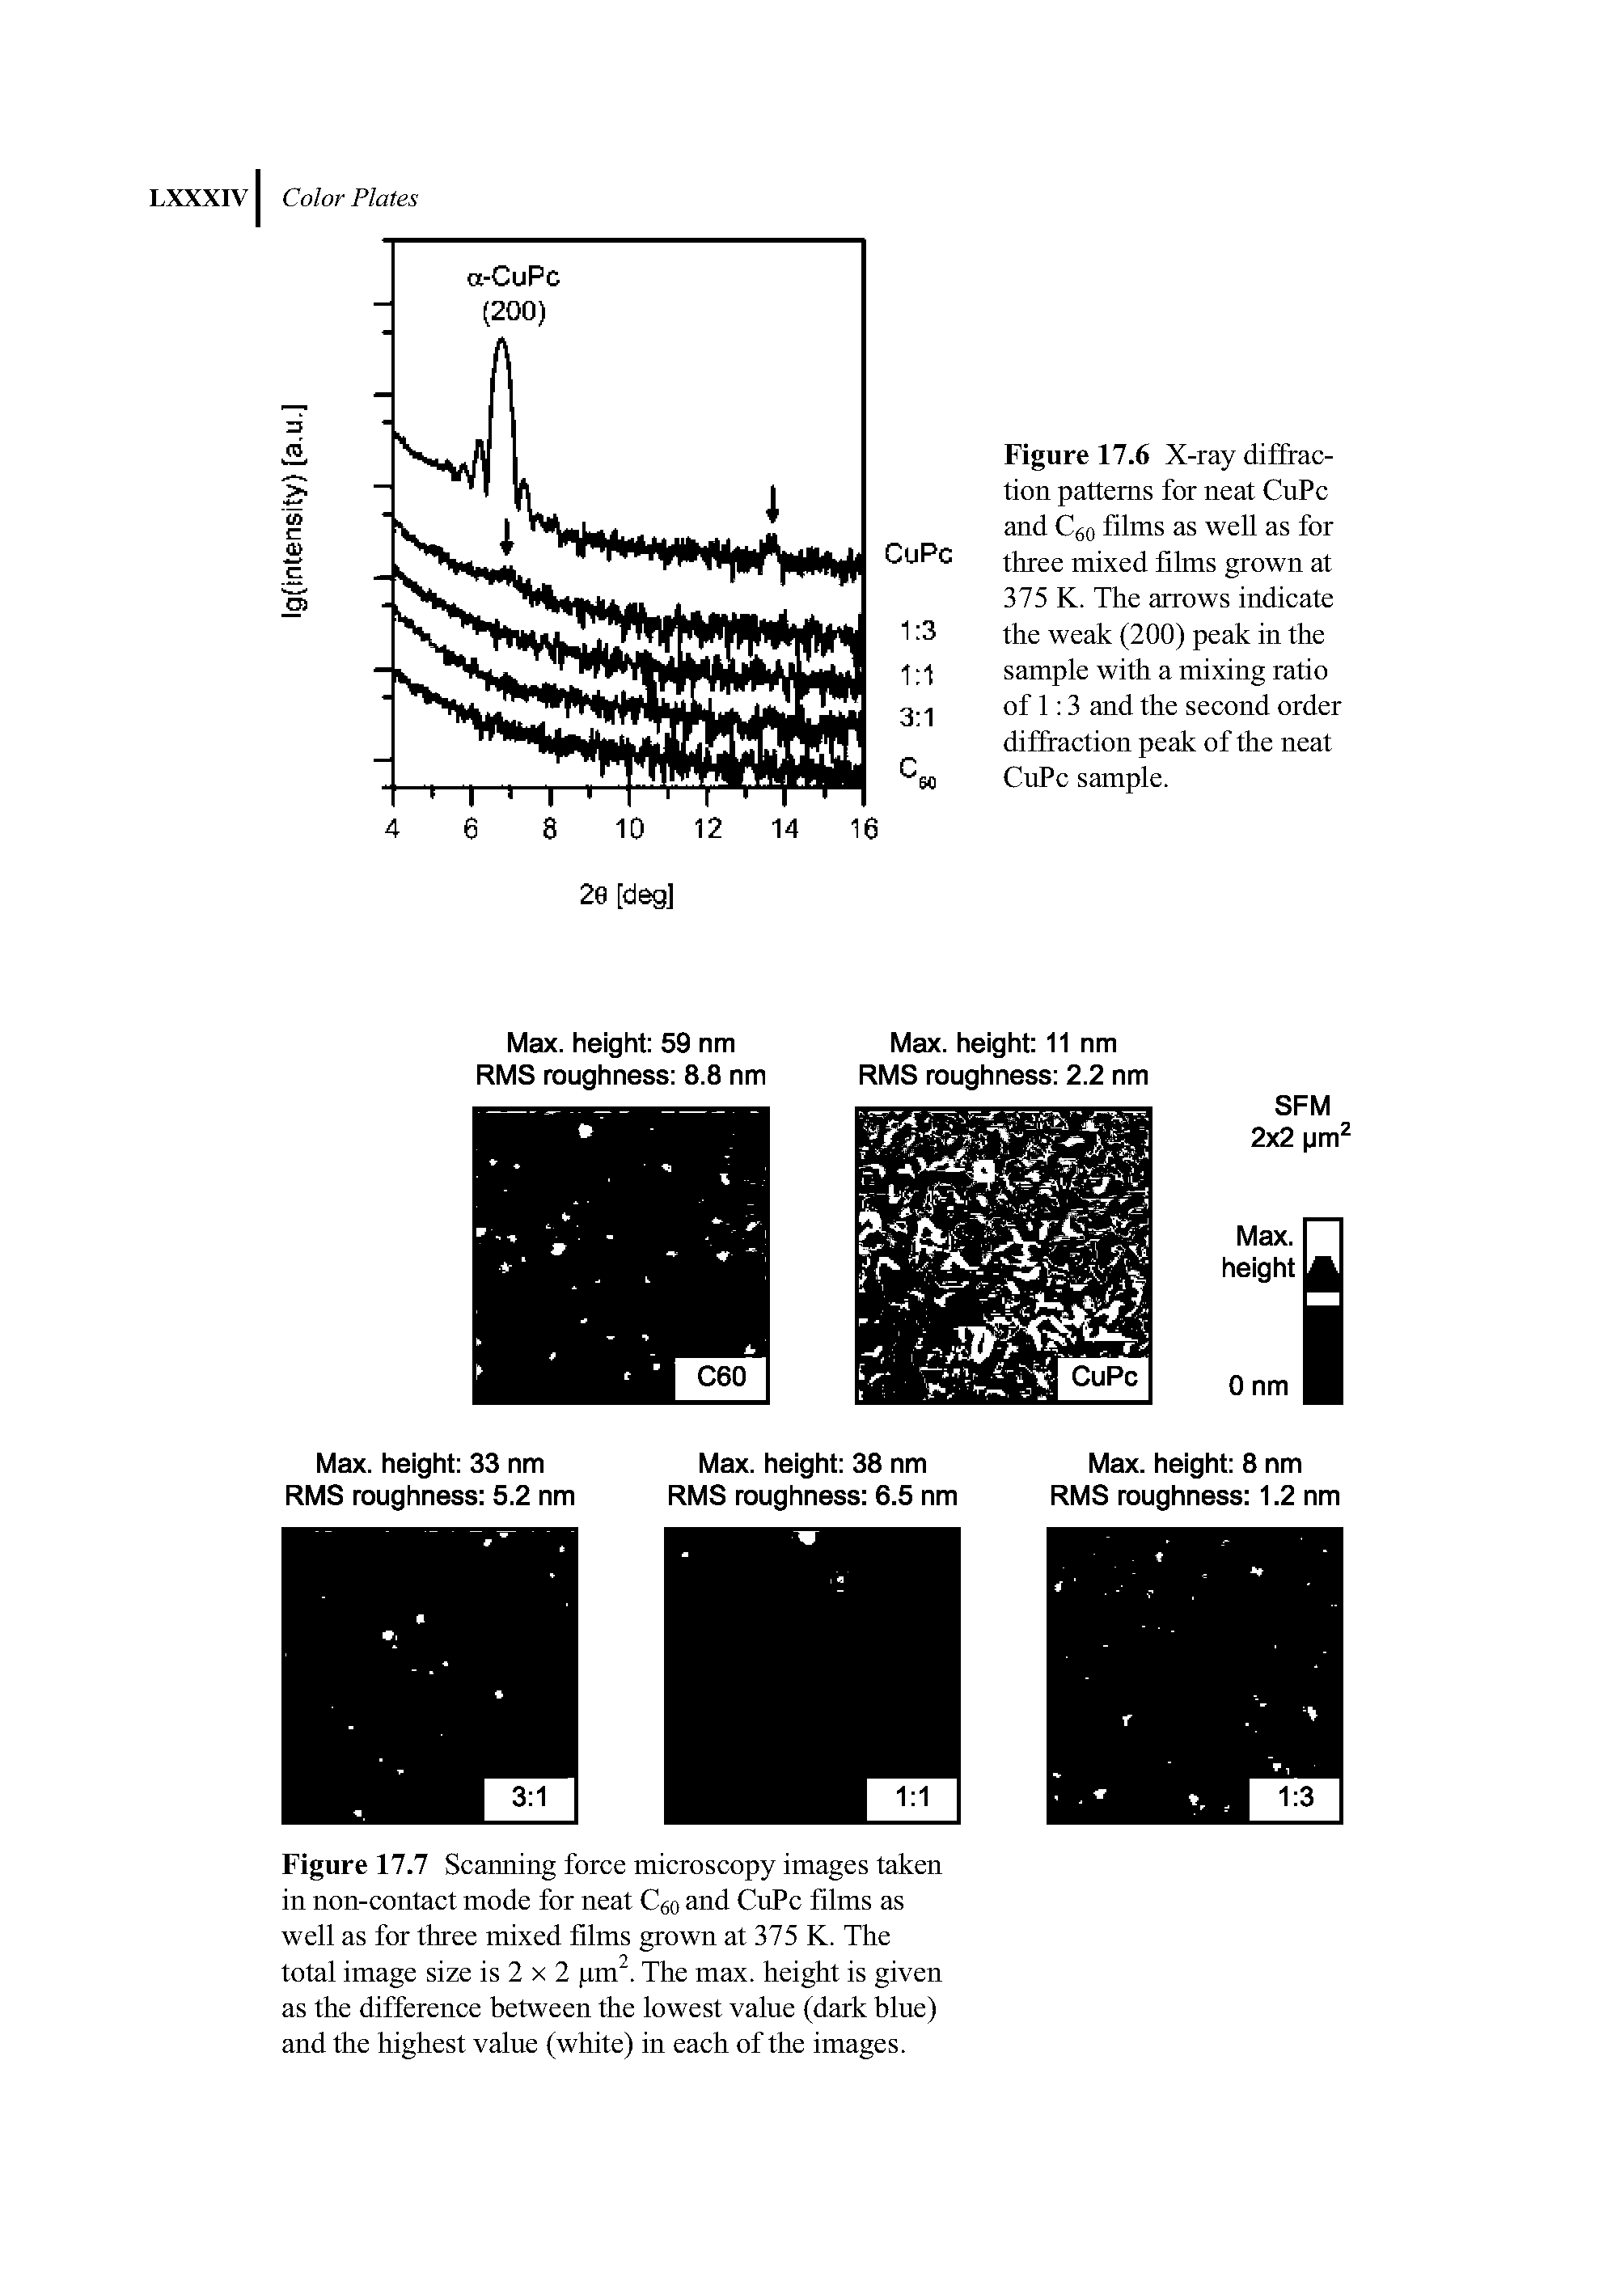 Figure 17.7 Scanning force microscopy images taken in non-contact mode for neat C o and CuPc films as well as for three mixed films grown at 375 K. The total image size is 2 x 2 pm. The max. height is given as the difference between the lowest value (dark blue) and the highest value (white) in each of the images.